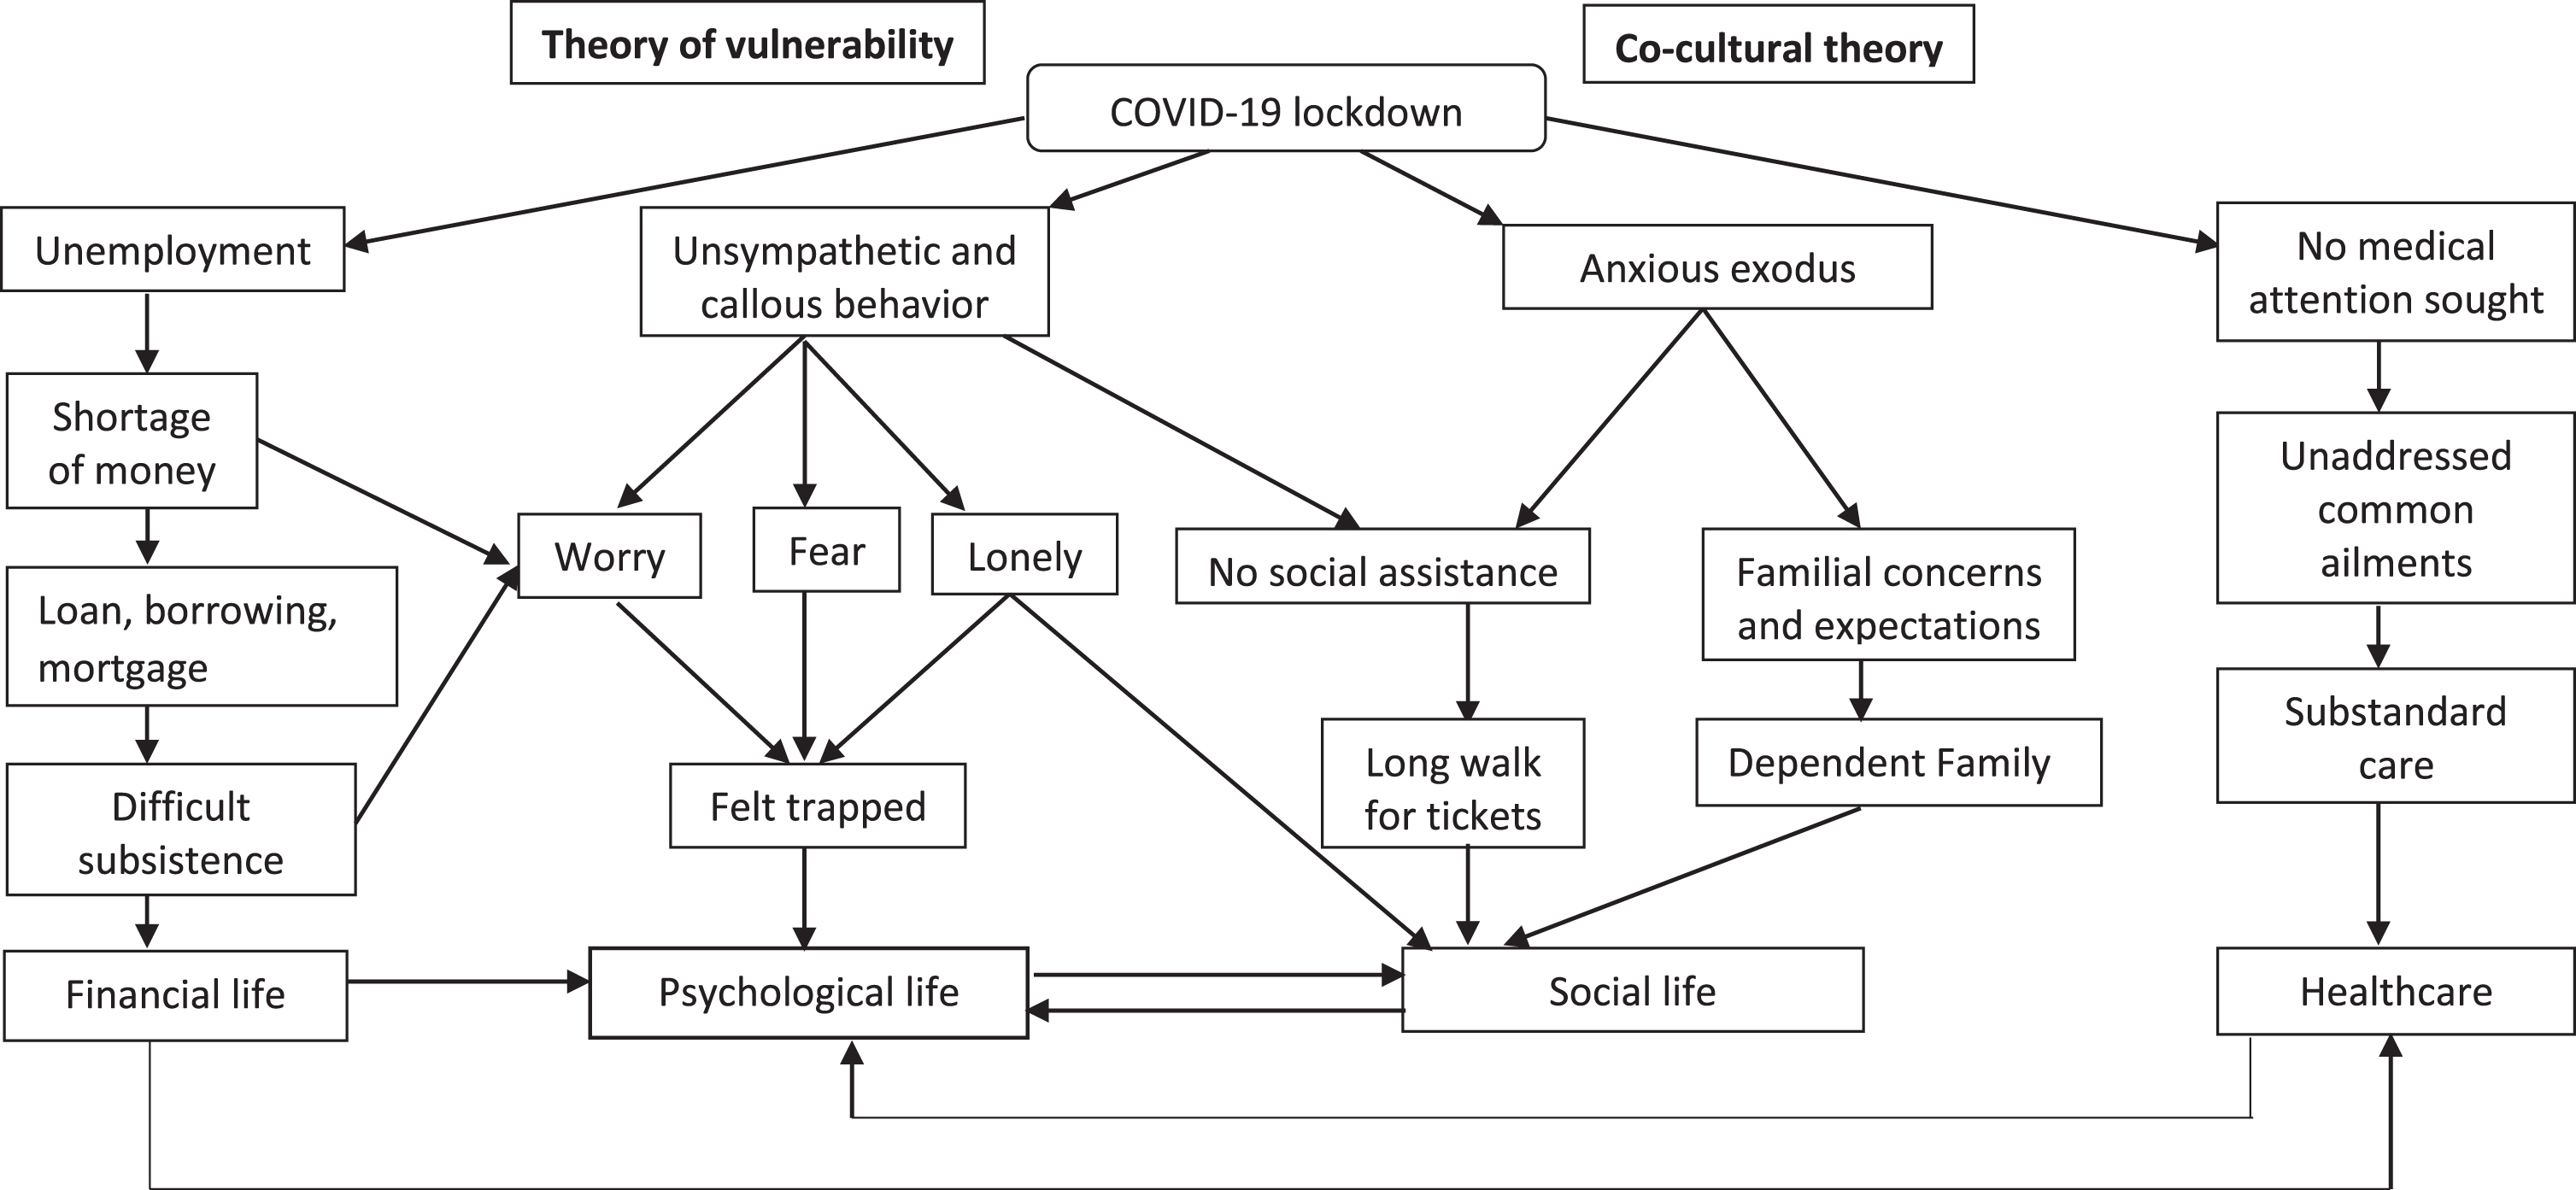 Co-cultural theory and theory of vulnerability explaining perceptions of migrant construction-site workers regarding the consequences of the COVID-19 lockdown.